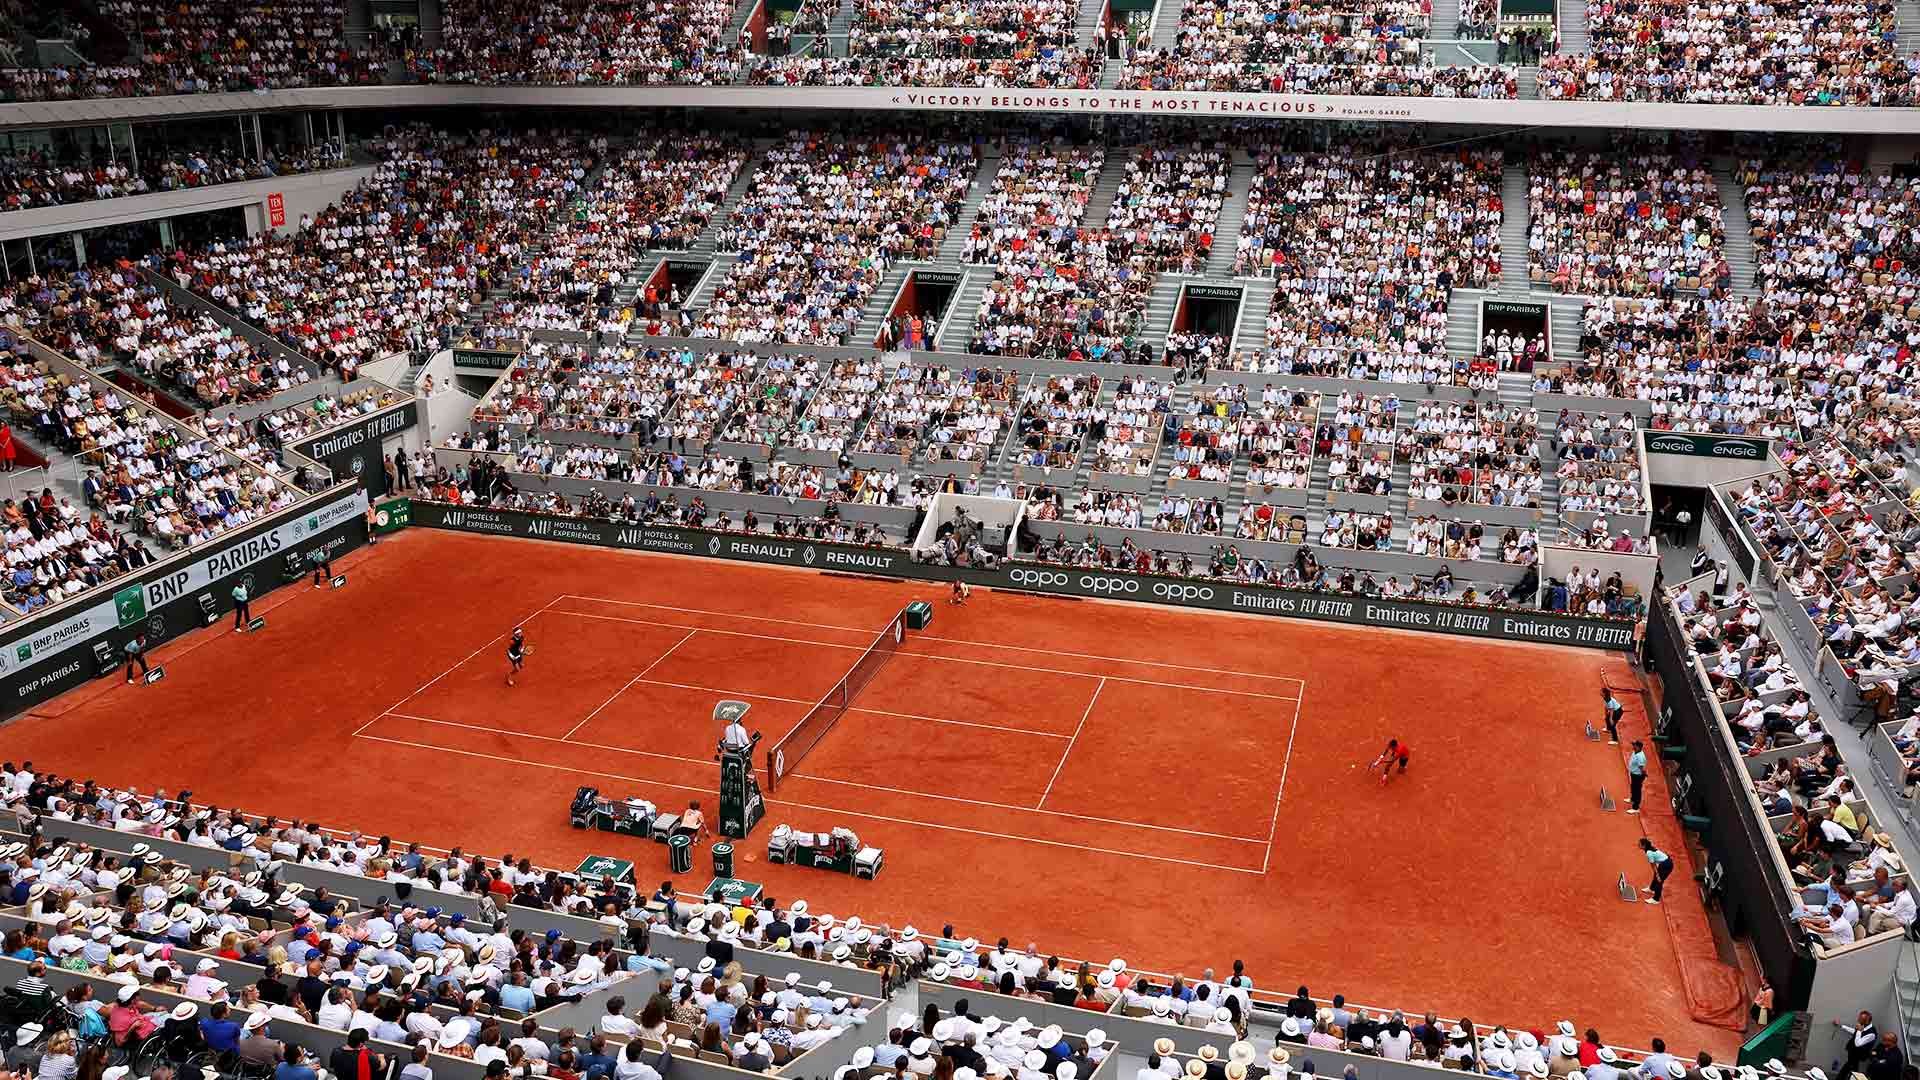 A match on Phillipe Chatrier at Roland Garros, filled with fans in the stands